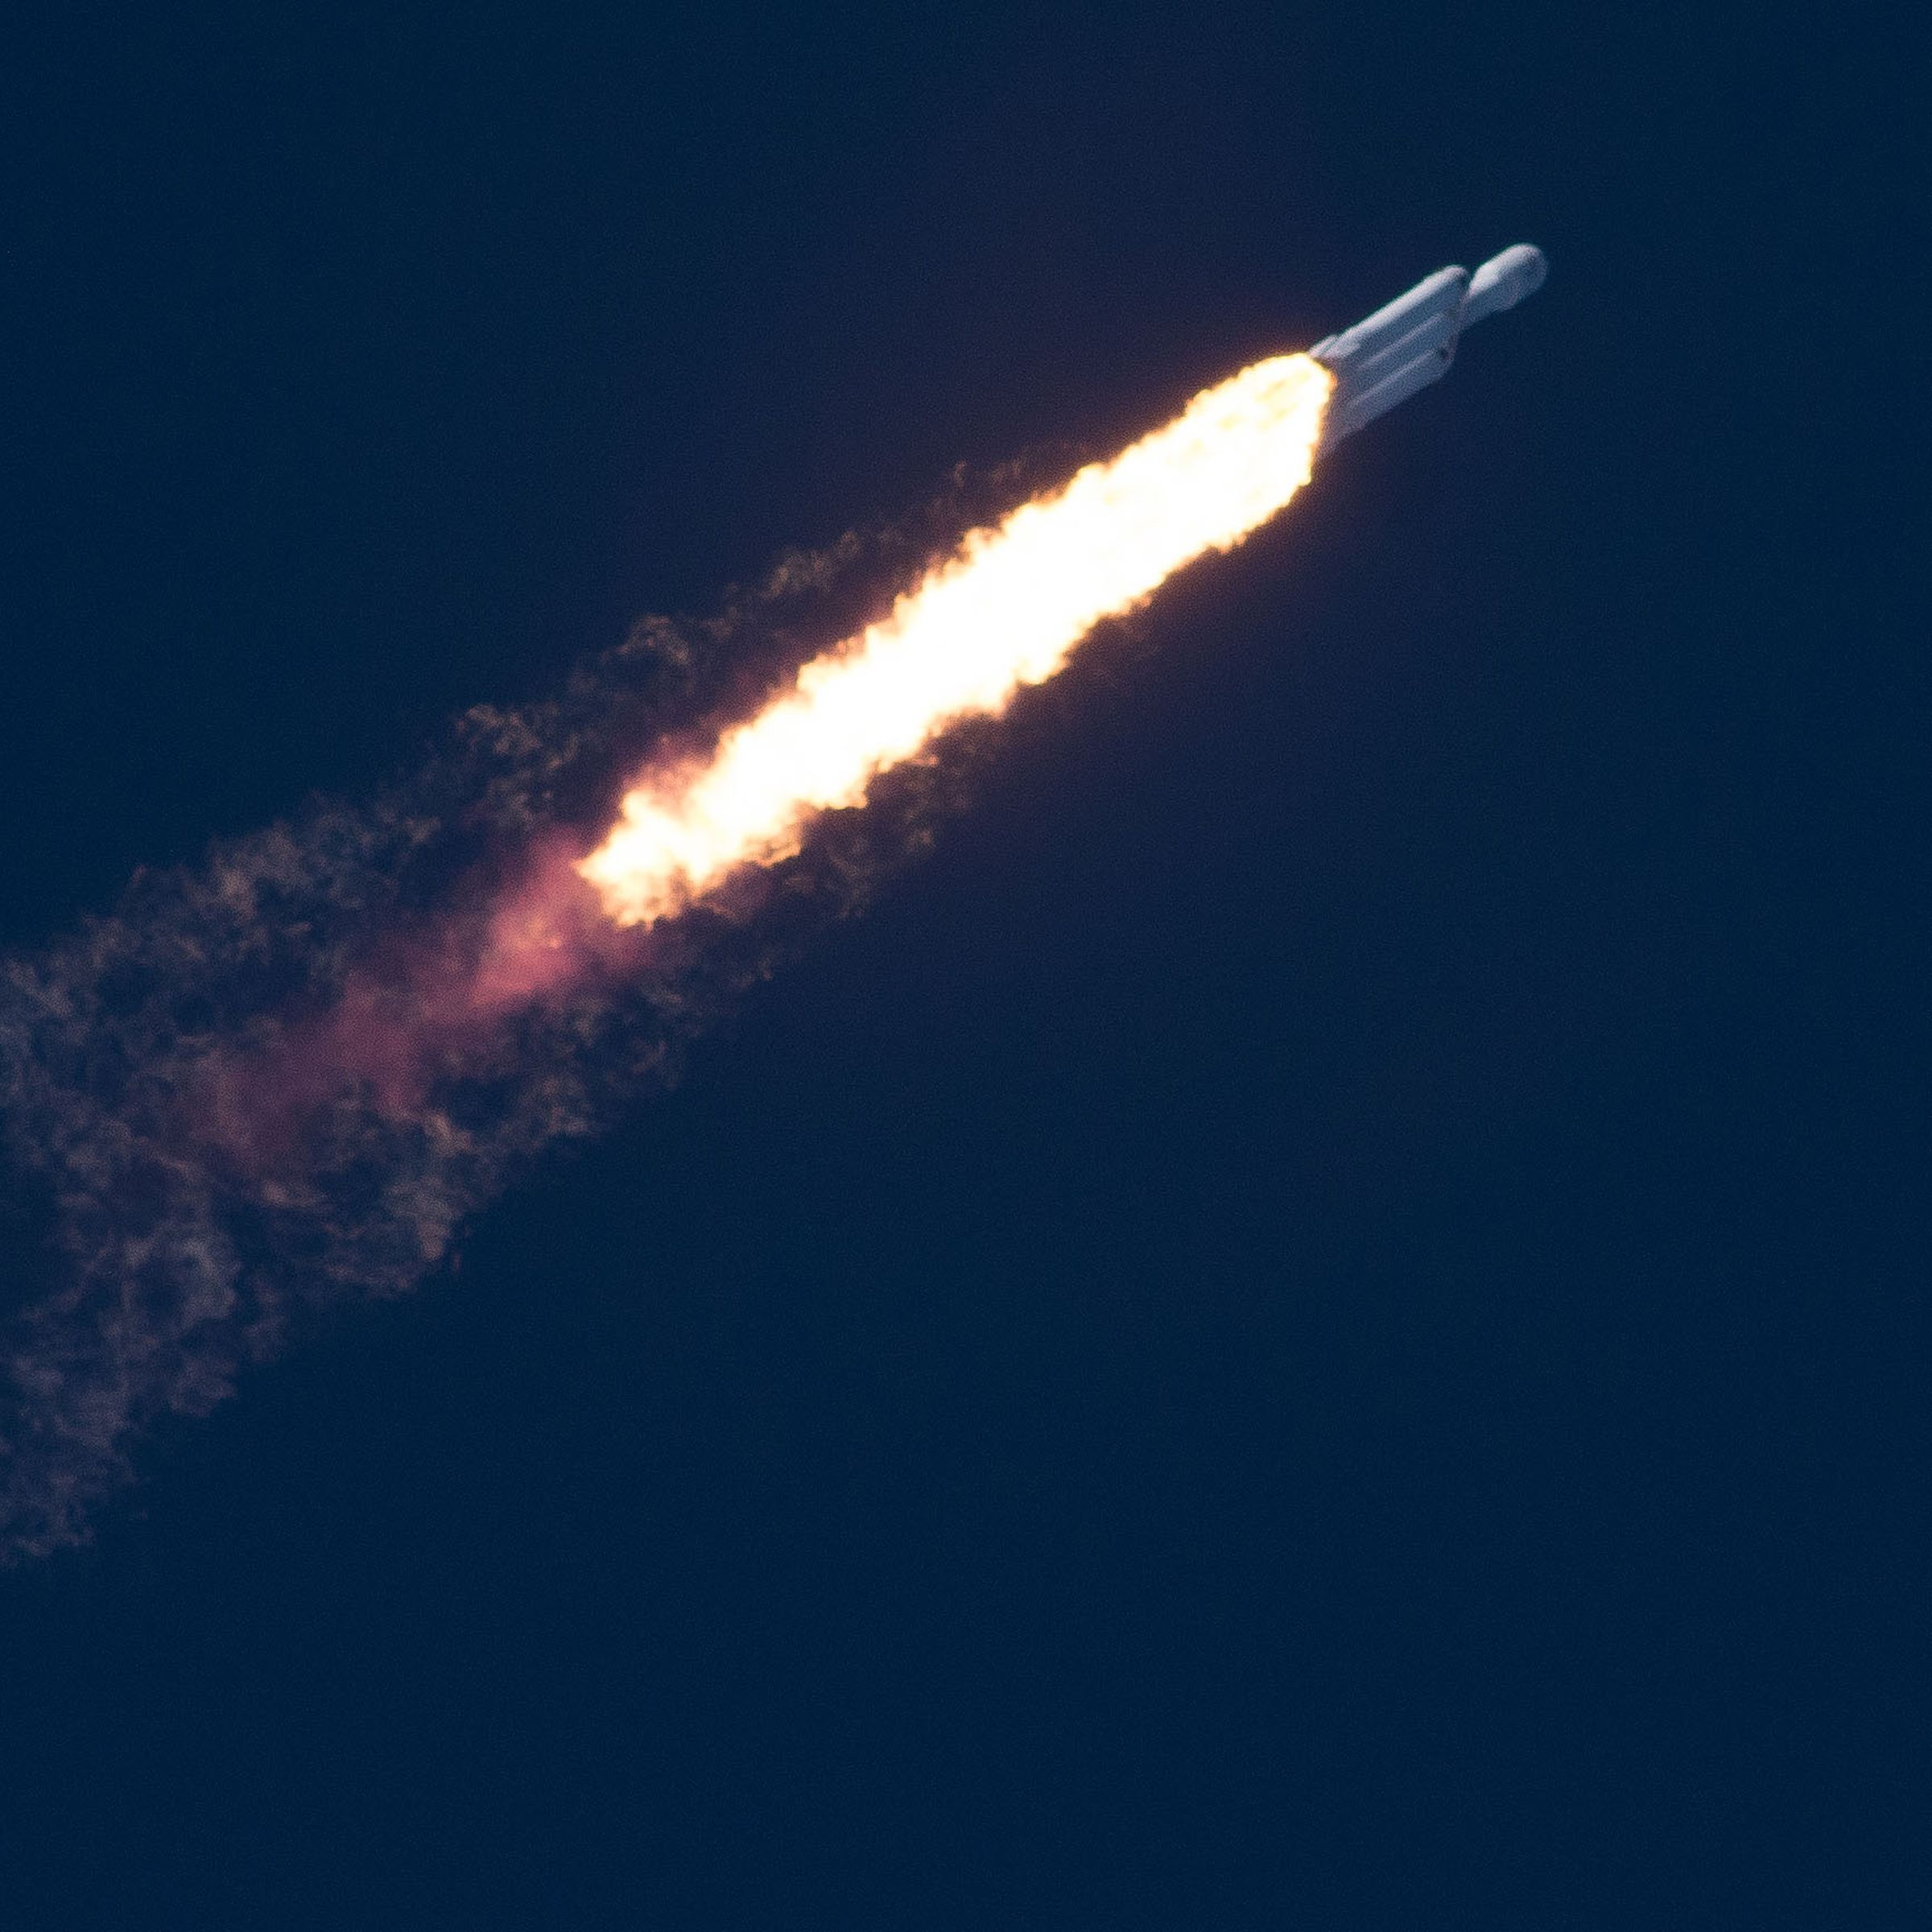 SpaceX’s Falcon Heavy rocket on its inaugural flight